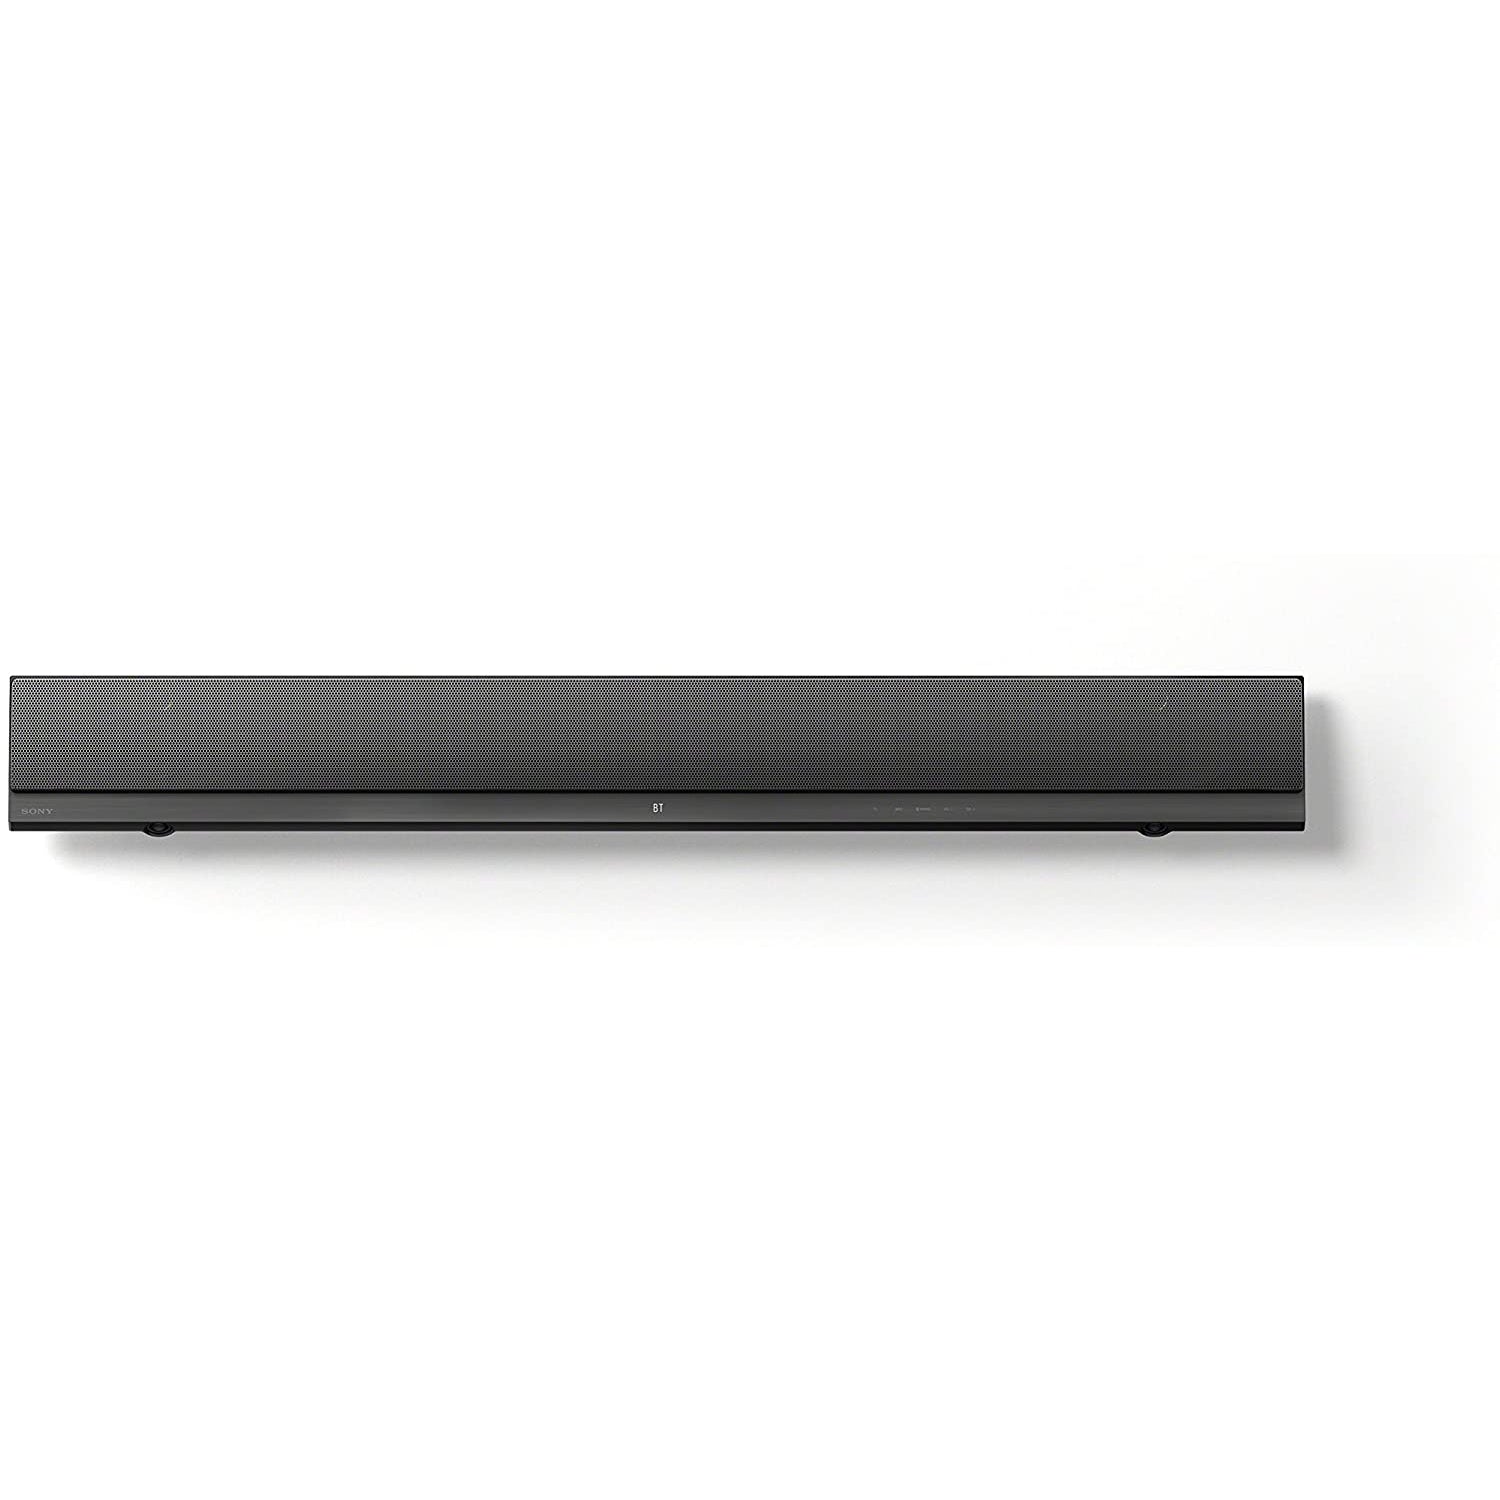 Sony HT-NT5 400 W Sound Bar with High-Resolution Audio and 4K Pass-Through - Black *Sound Bar Only*